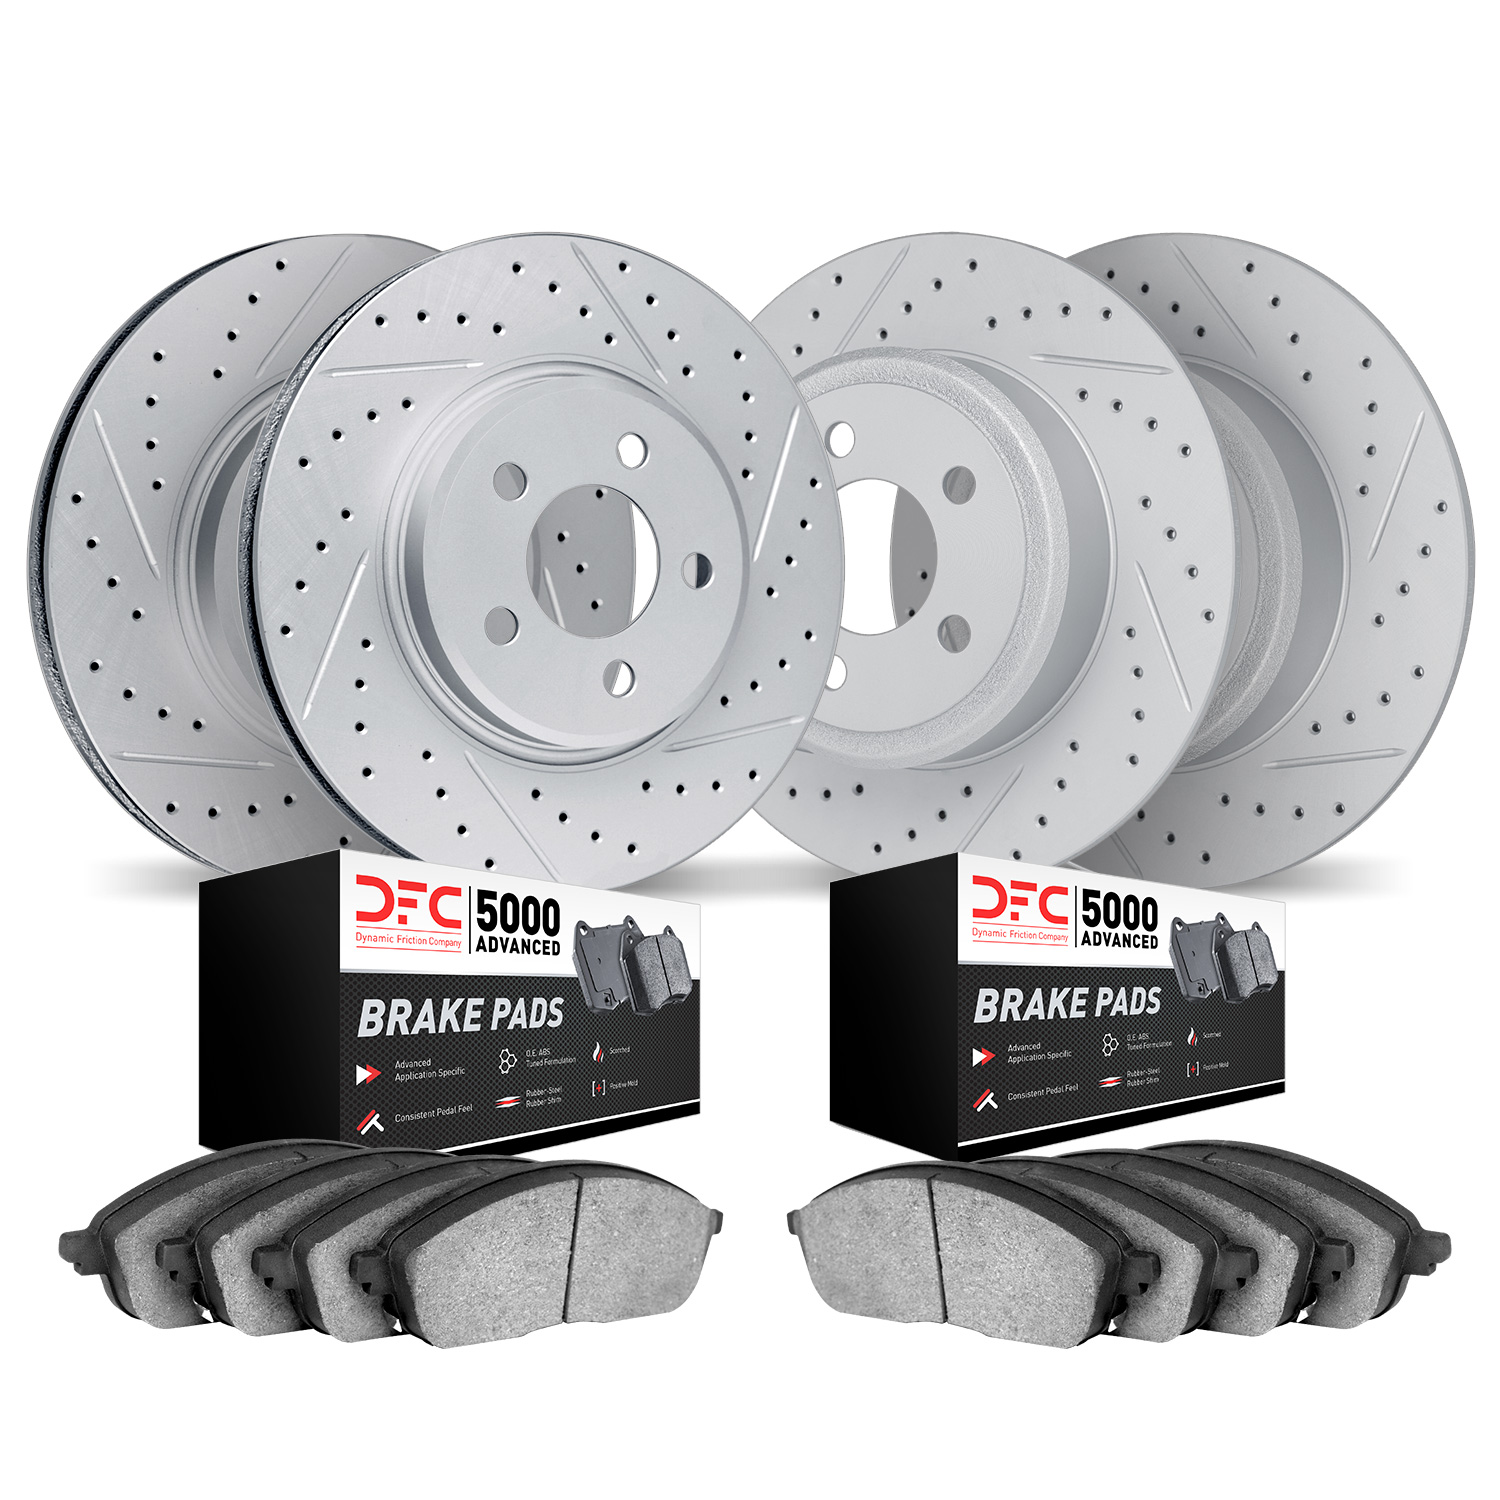 2504-58000 Geoperformance Drilled/Slotted Rotors w/5000 Advanced Brake Pads Kit, 2009-2014 Acura/Honda, Position: Front and Rear